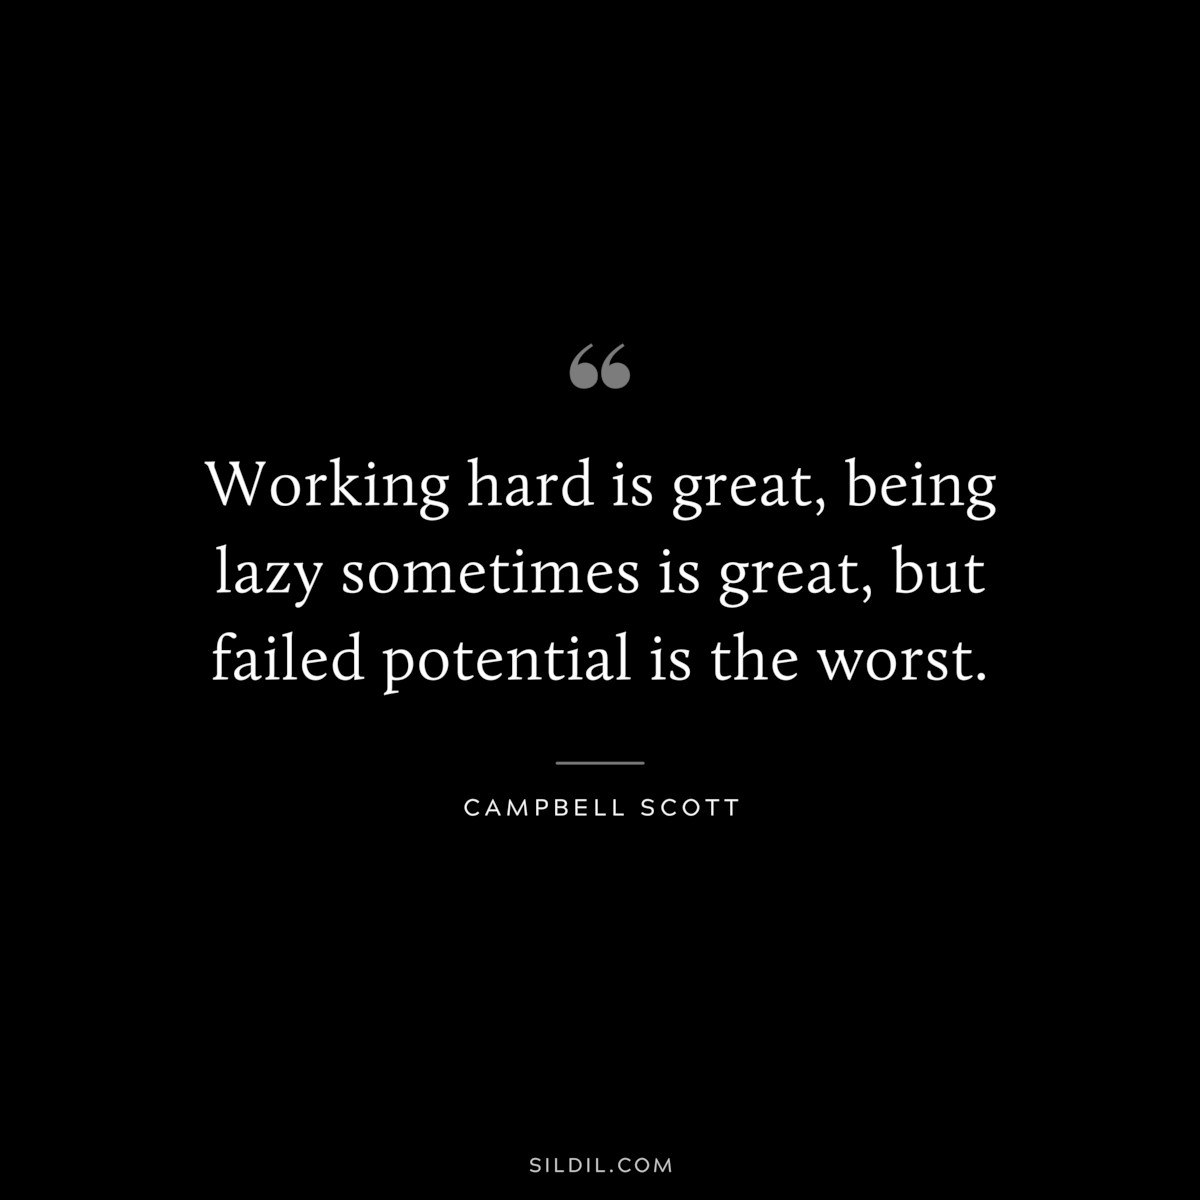 Working hard is great, being lazy sometimes is great, but failed potential is the worst. ― Campbell Scott